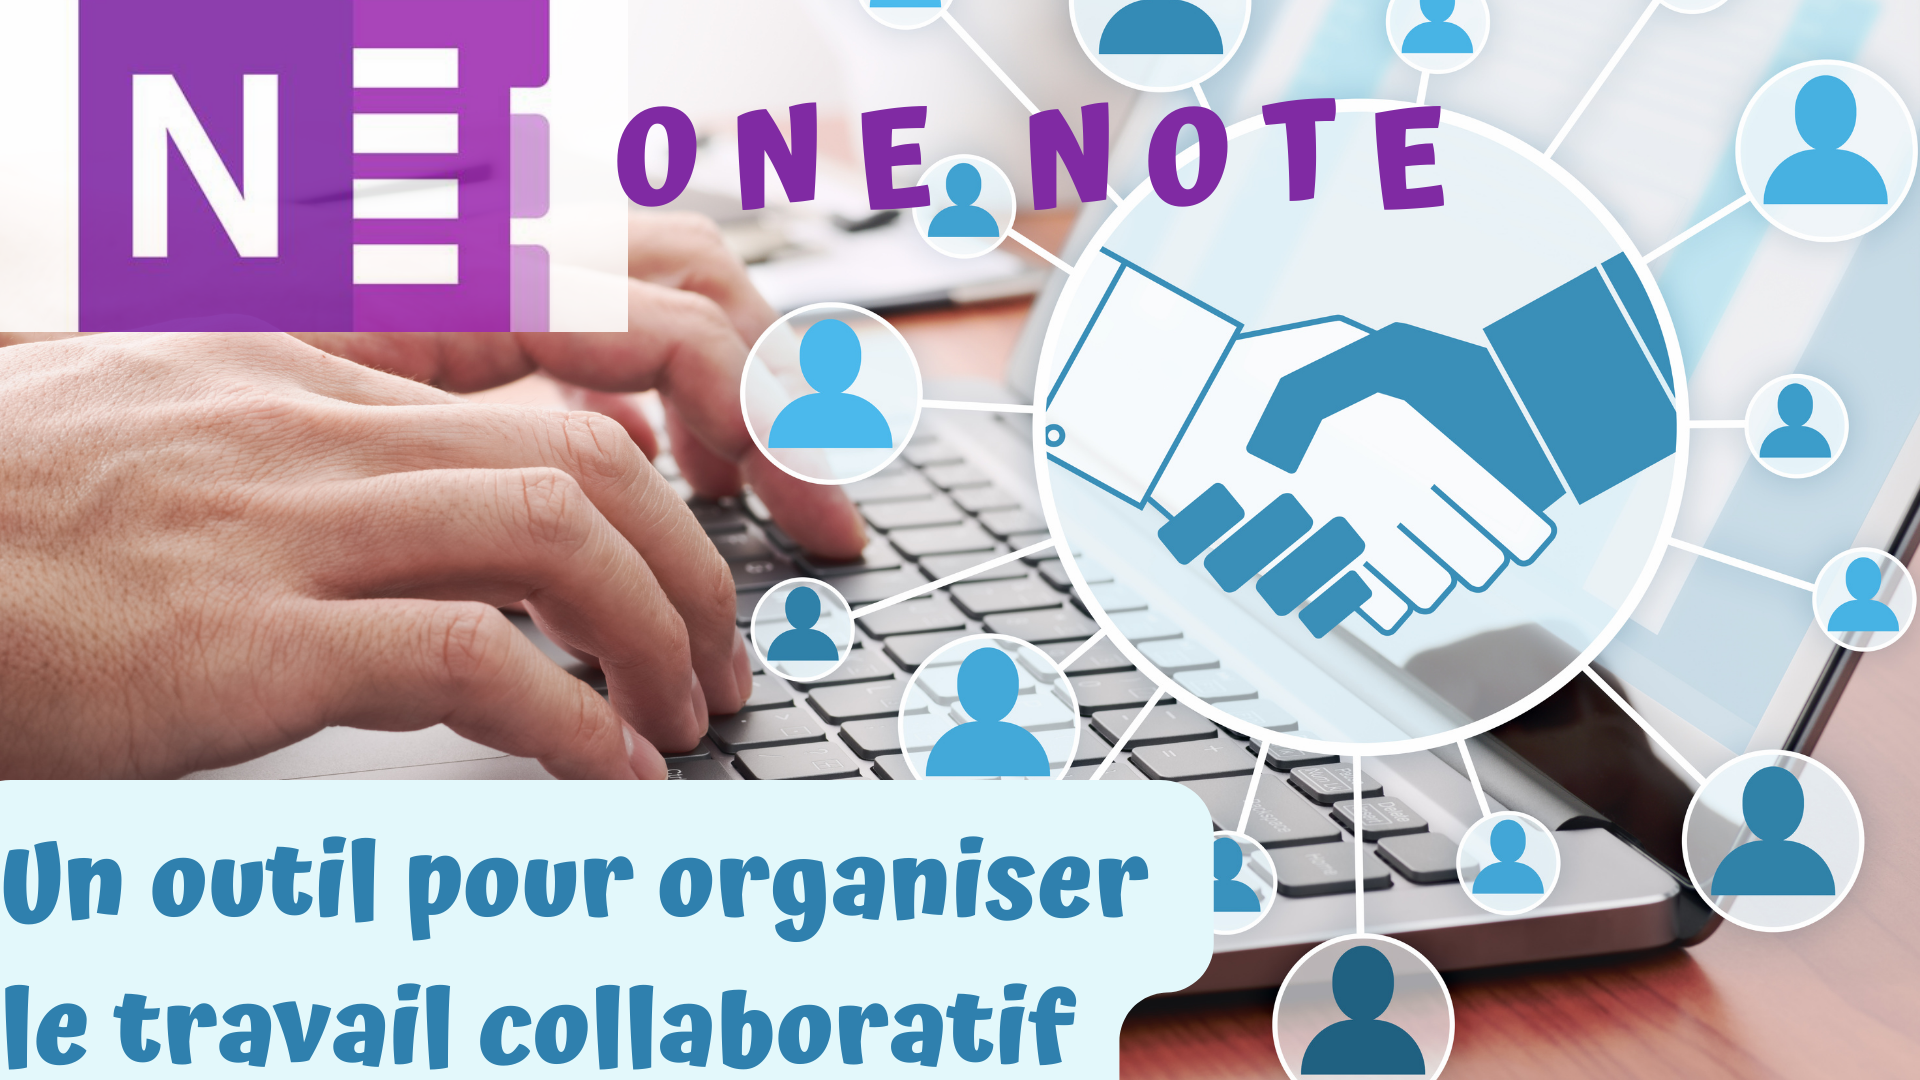 You are currently viewing One Note : un outil pour organiser le travail collaboratif